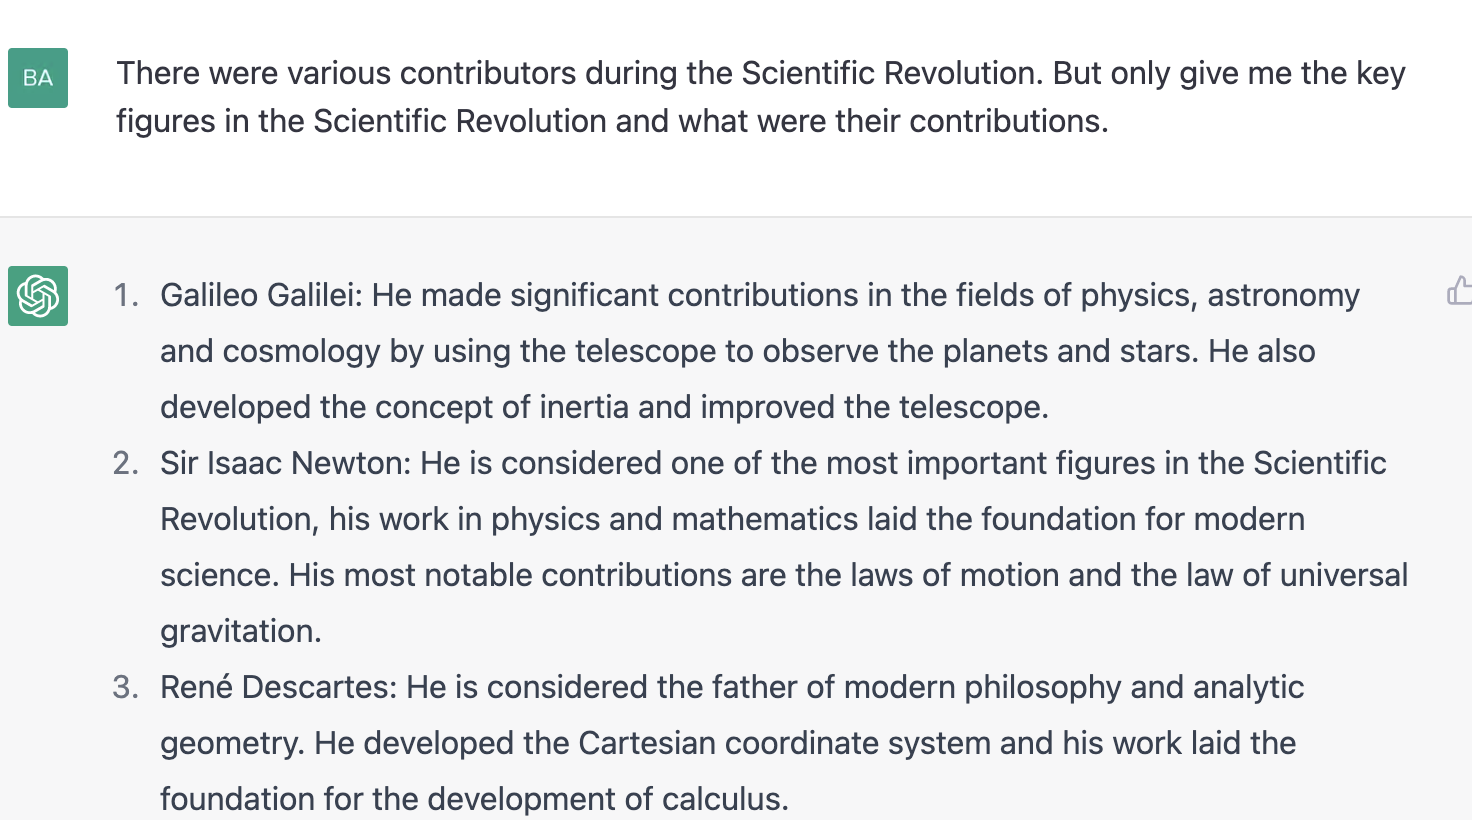 ChatGPT prompt about giving the key figures in the scientific Revolution and what were their contributions